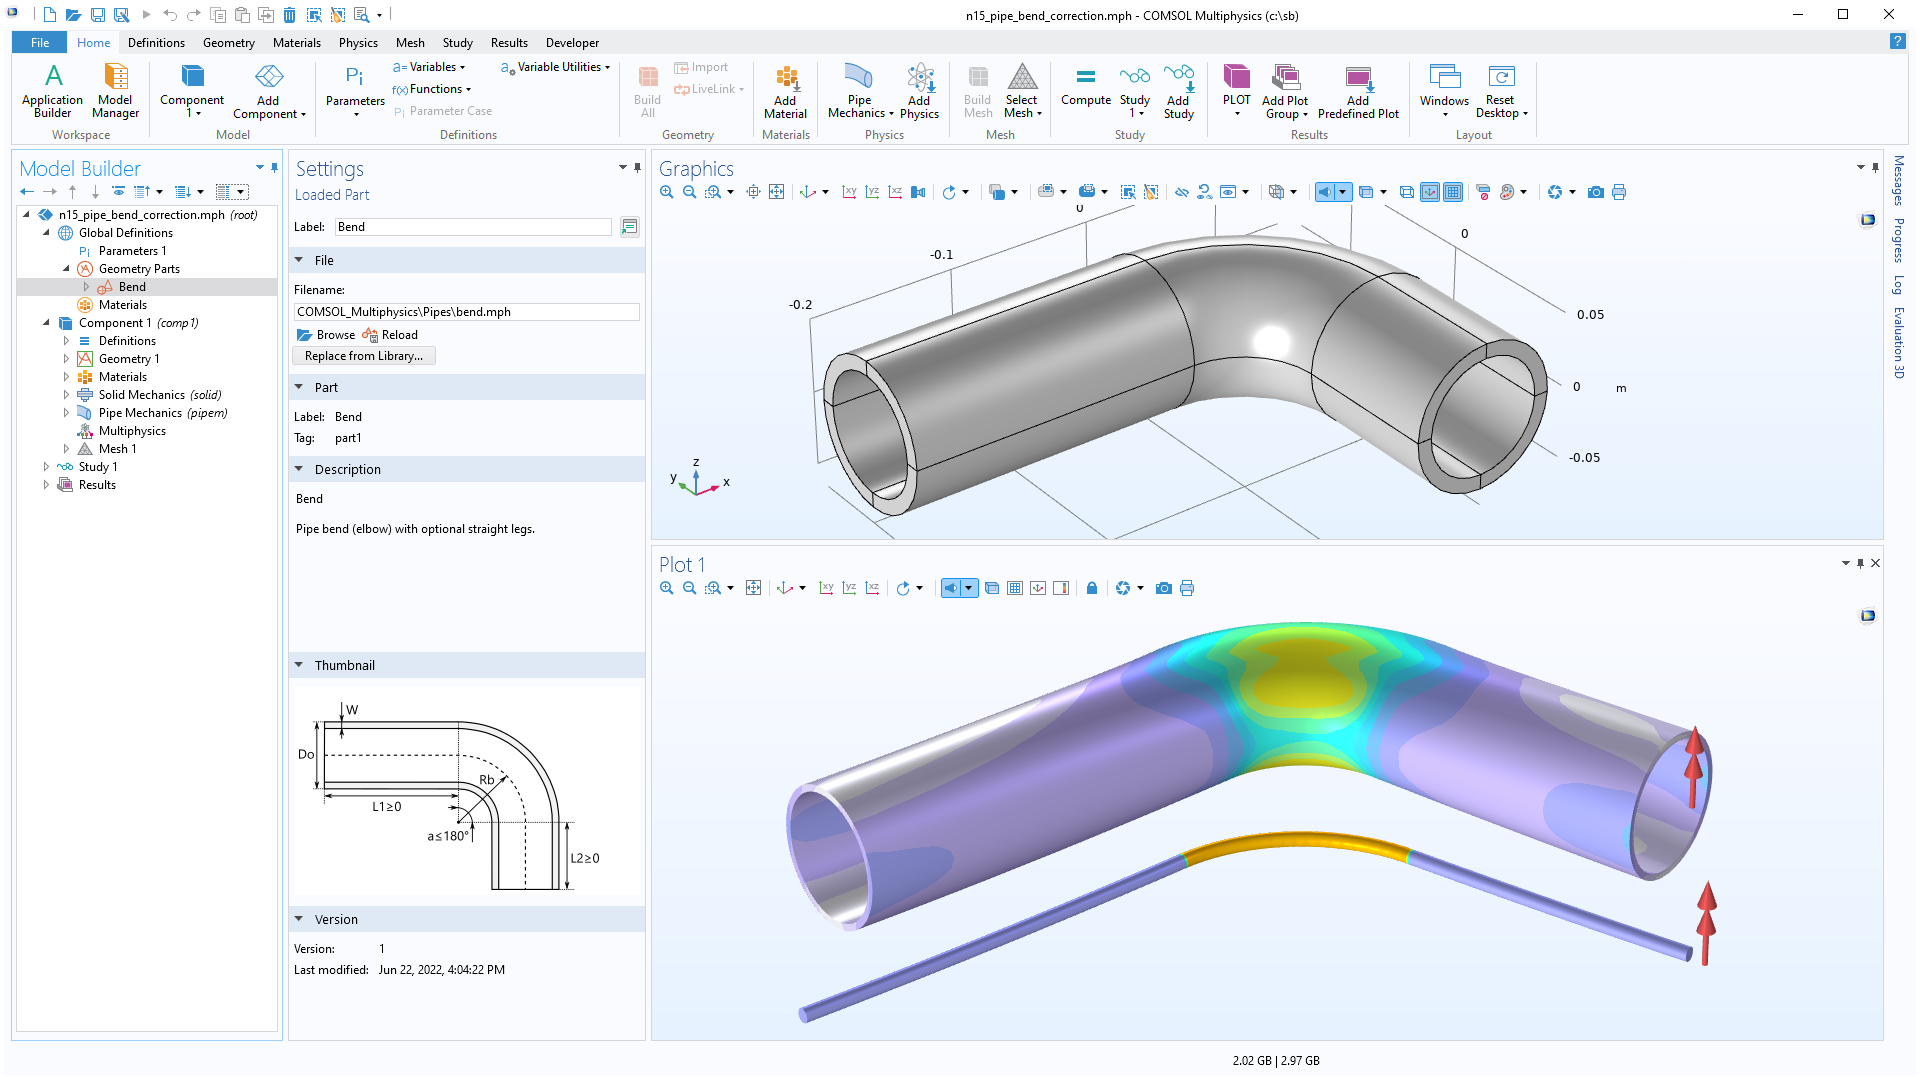 The COMSOL Multiphysics UI showing the Model Builder with a Loaded Part node highlighted, the corresponding Settings window, and two Graphics windows.